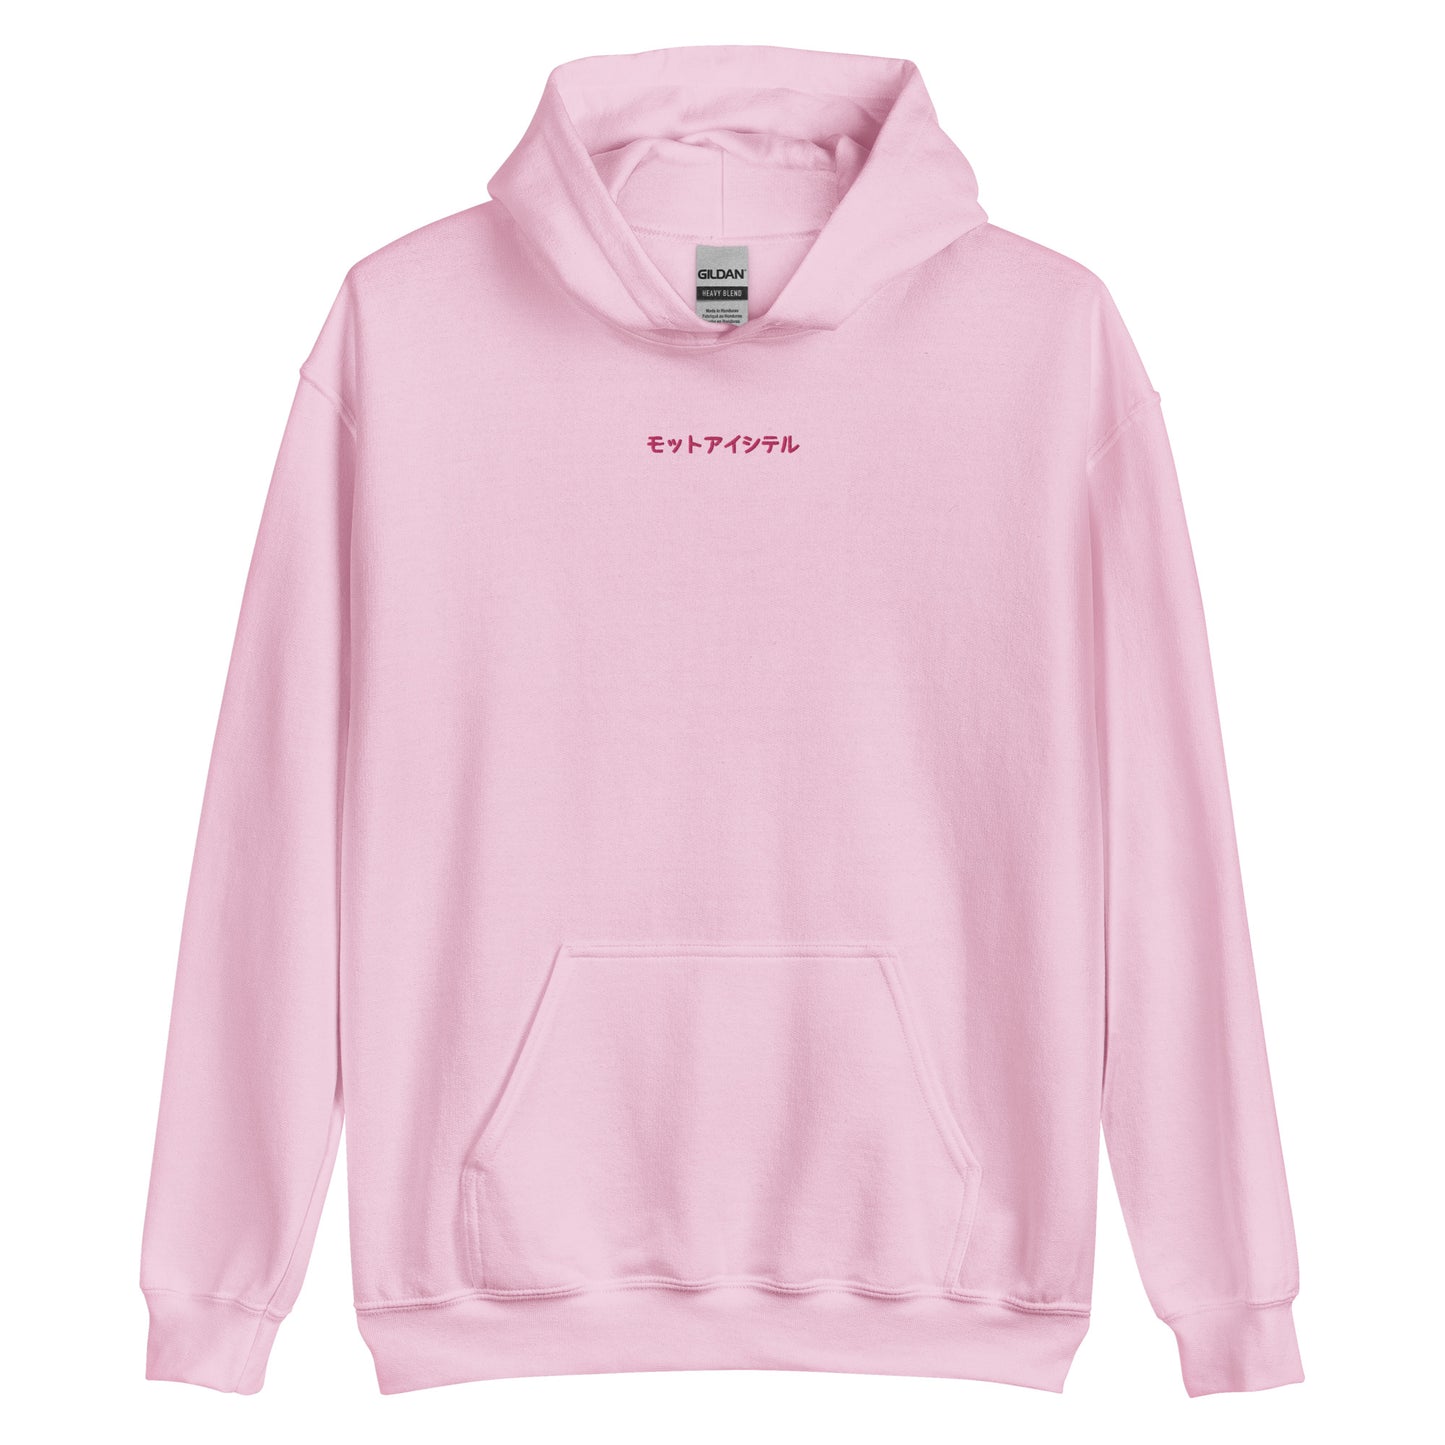 I Love You Embroidered Japanese Hoodie Black Pink